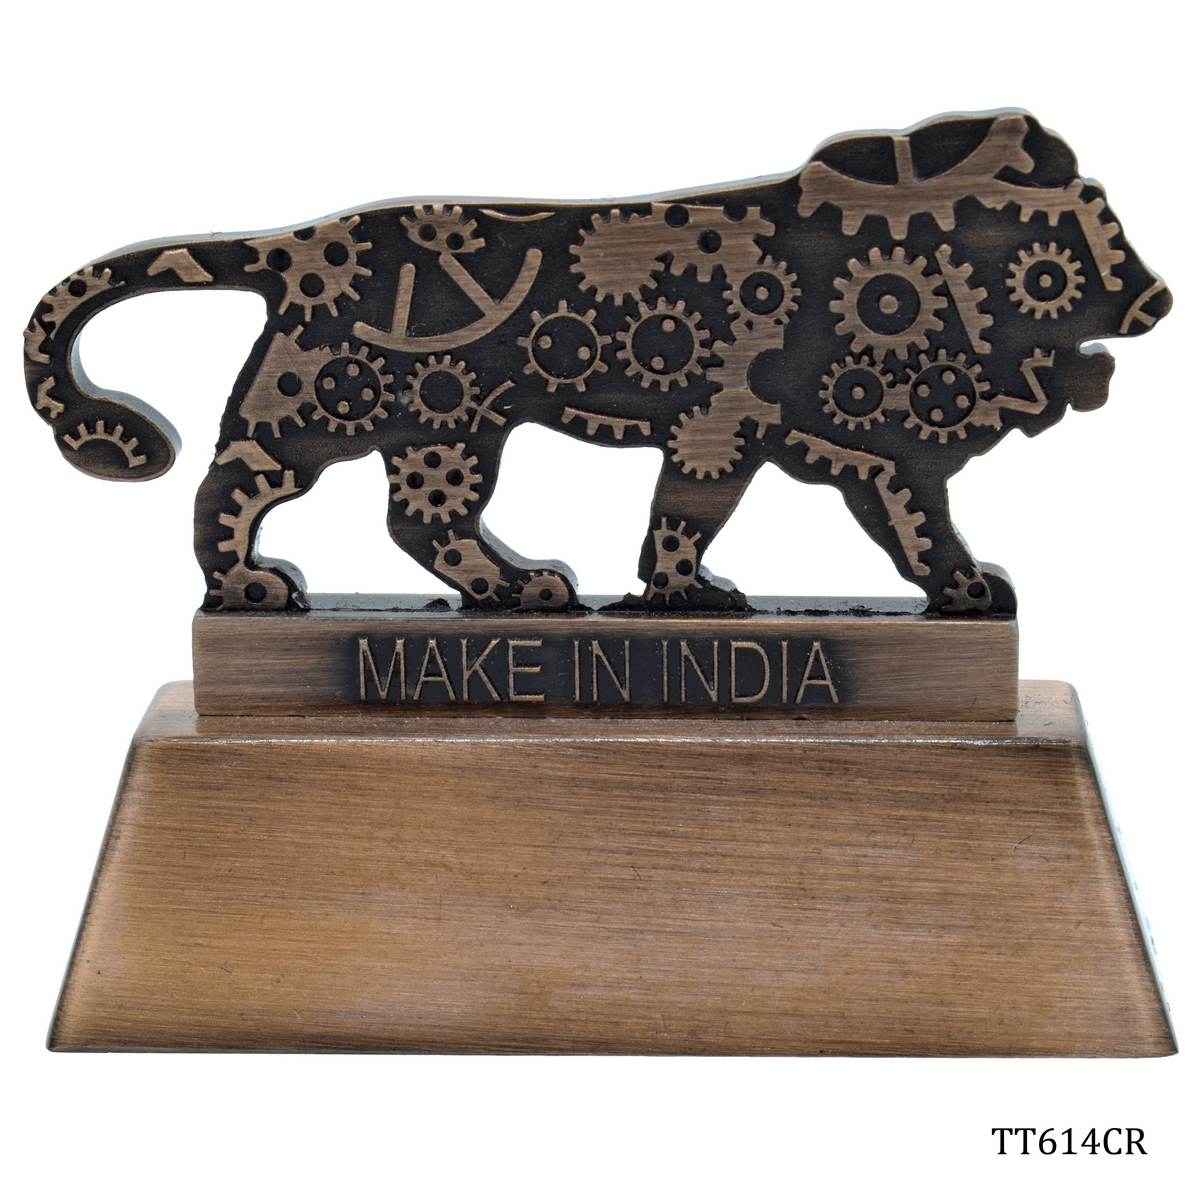 jags-mumbai Paper Weight Paper Weight Make In India Copper